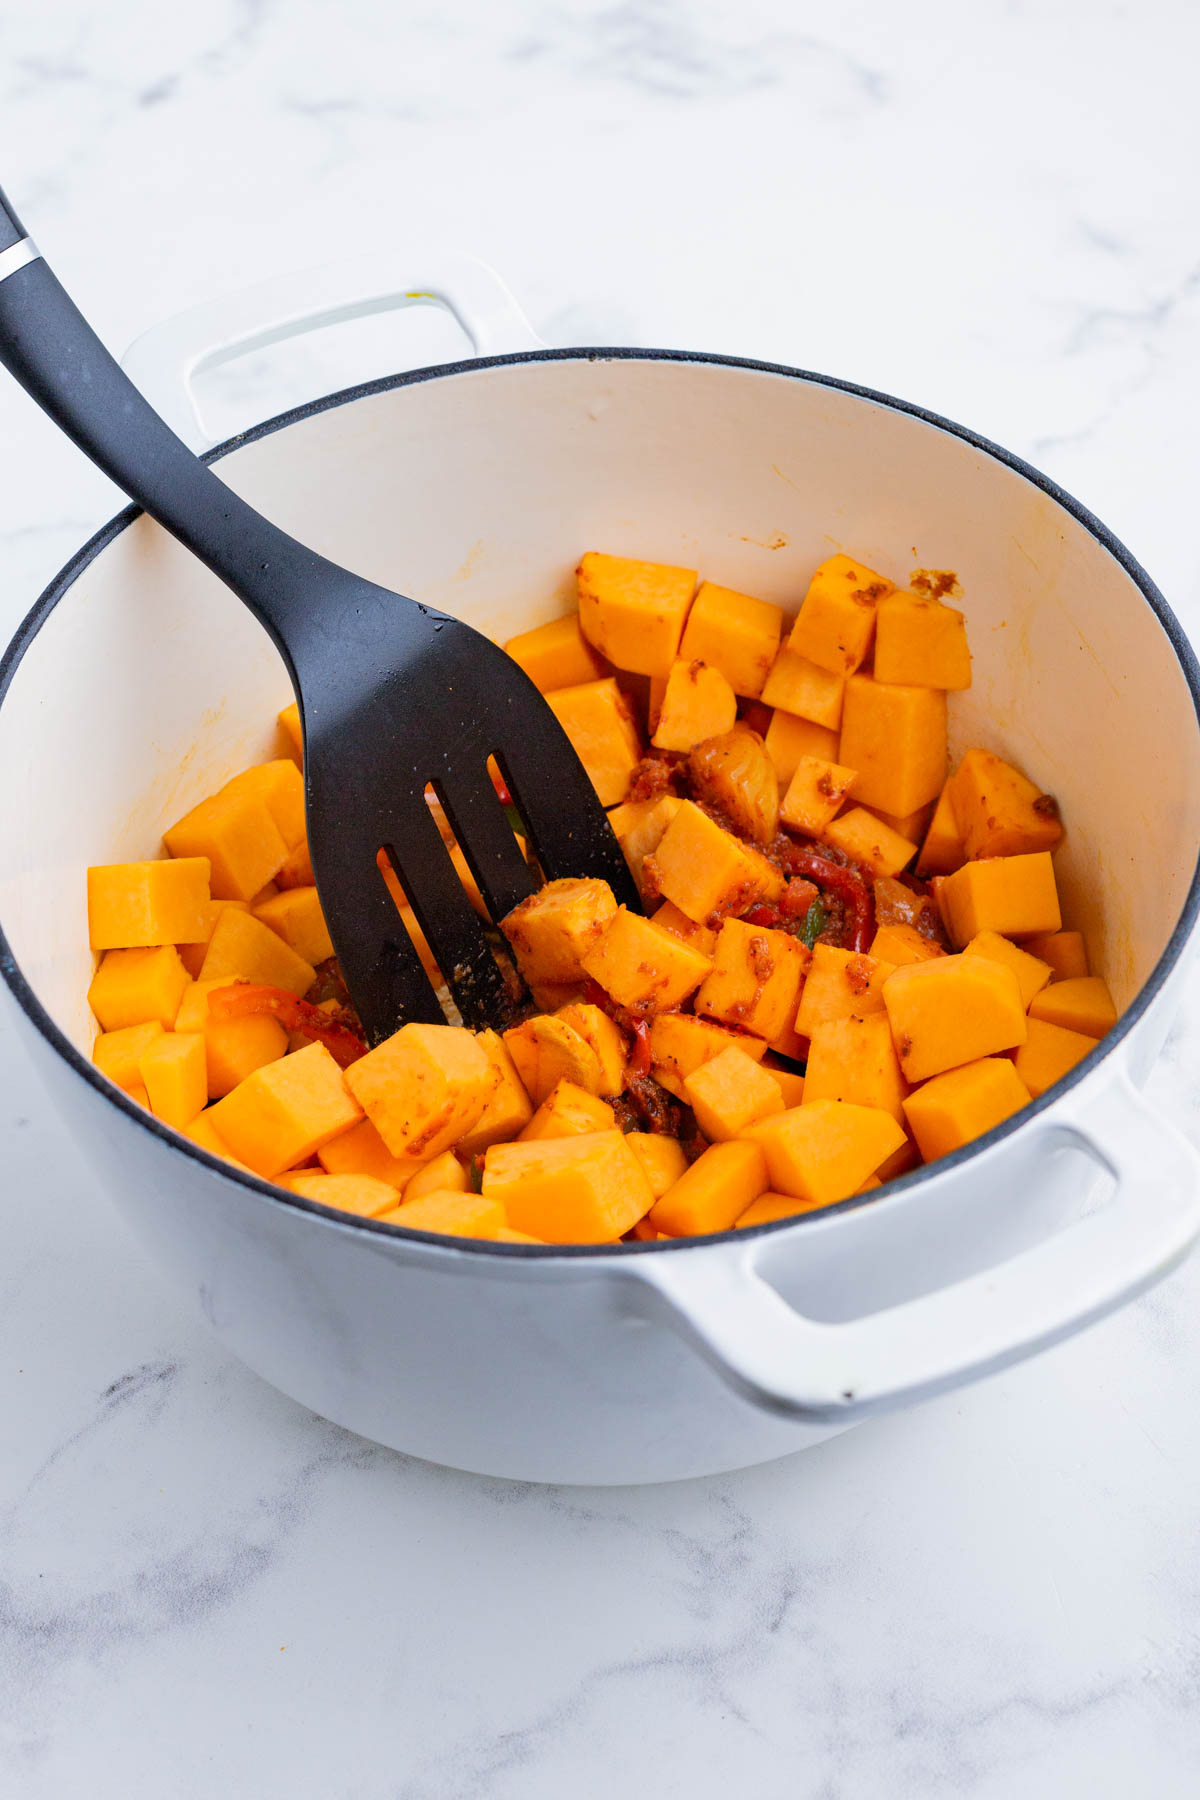 The chopped pumpkin is added to the pot.